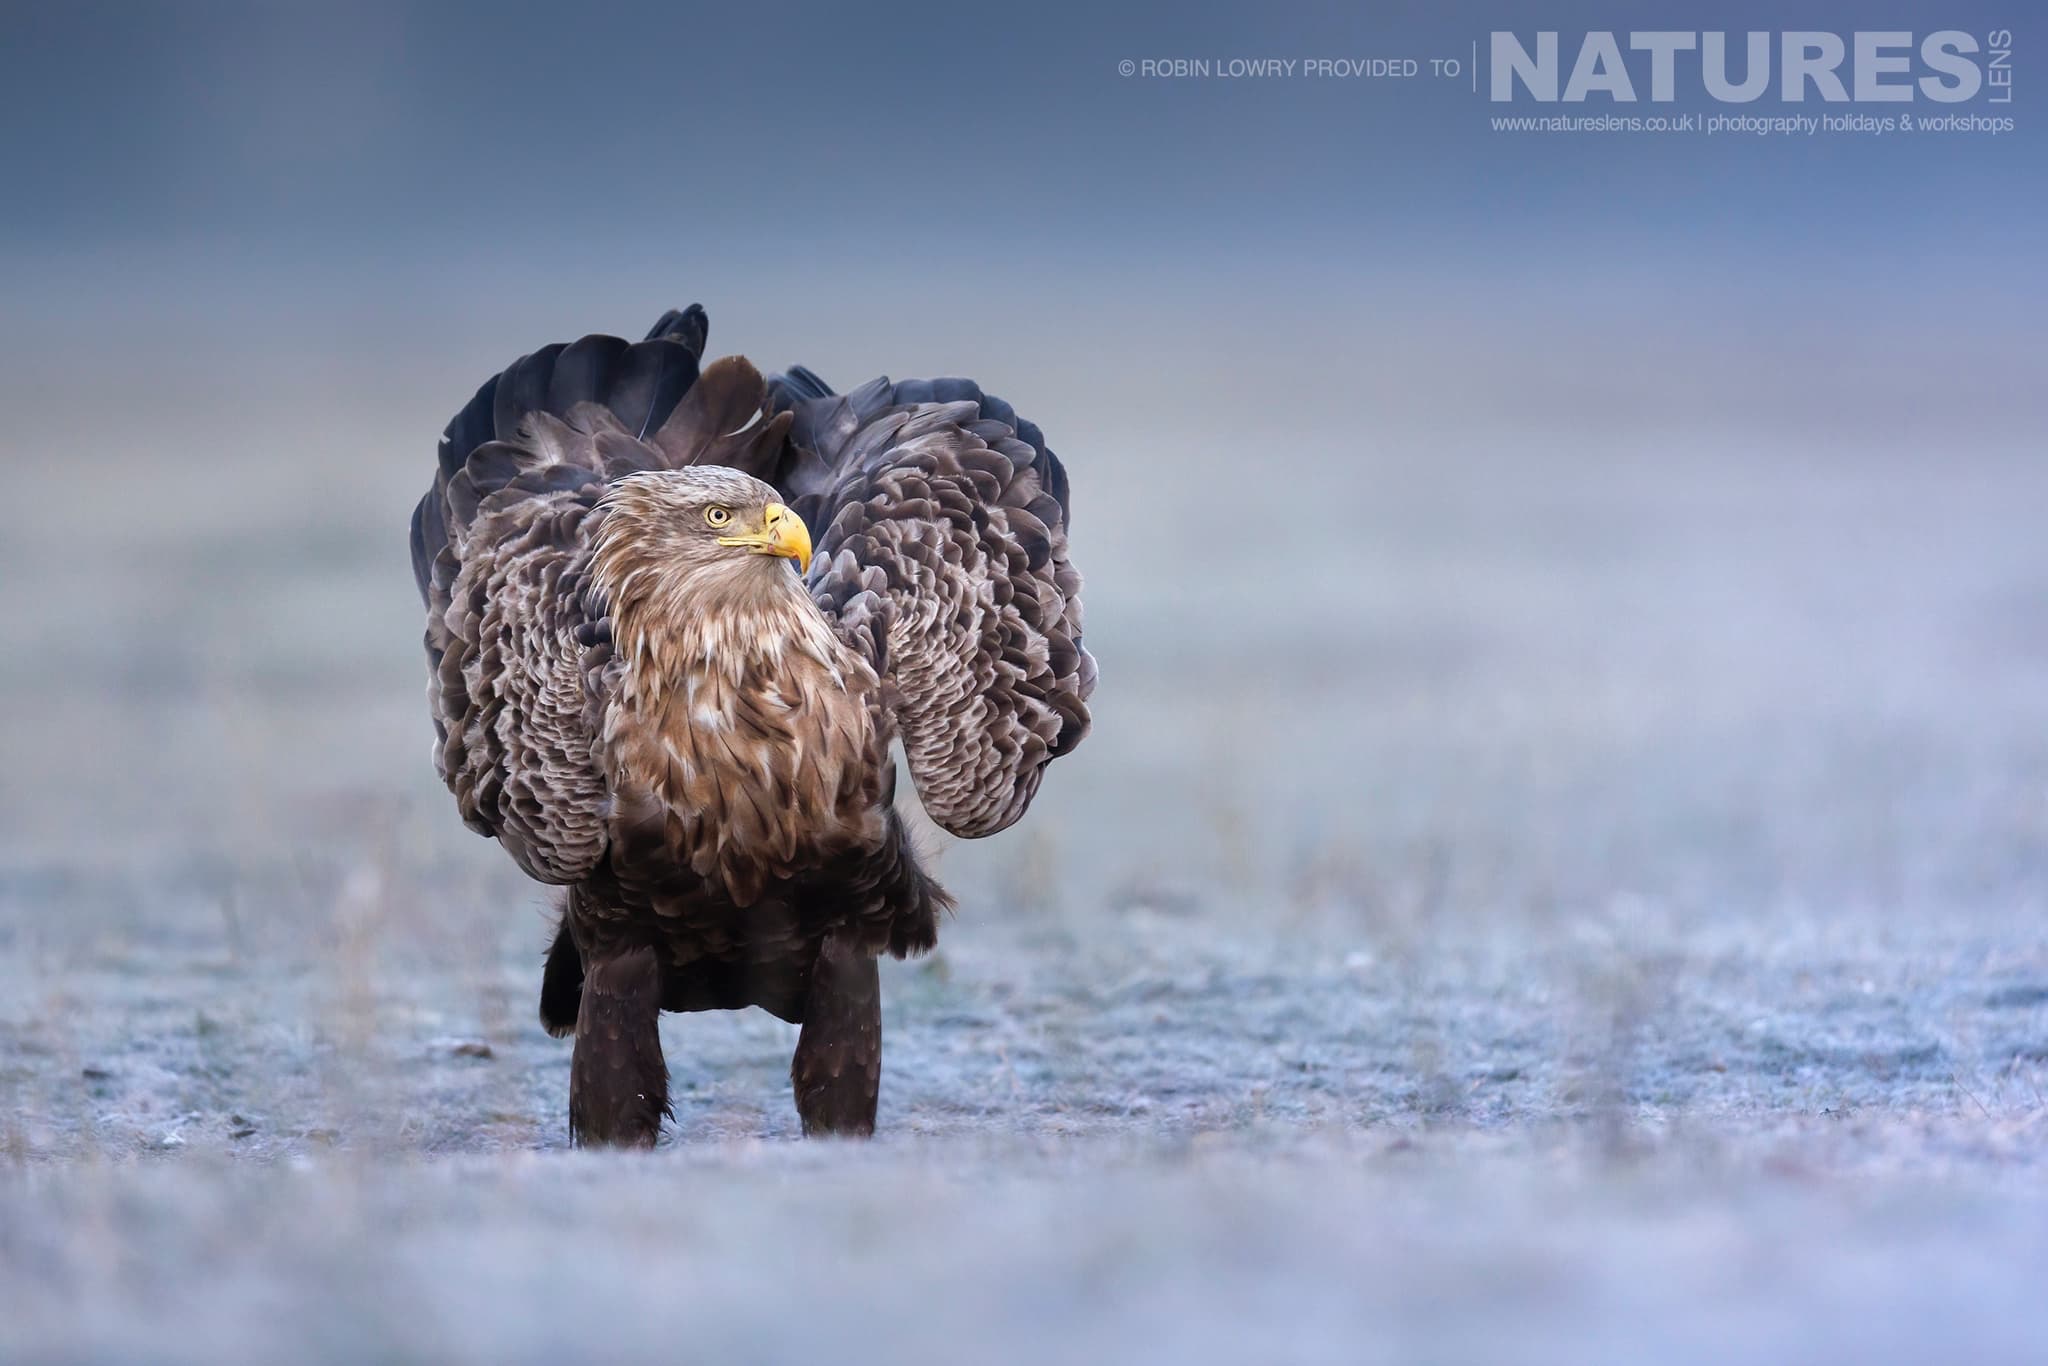 One Of The White Tailed Eagles Rouses It'S Feathers Whilst Stood On Frozen Ground The Largest Bird Species Found Amongst The Wildlife Of The Hortobágy National Park In Hungary